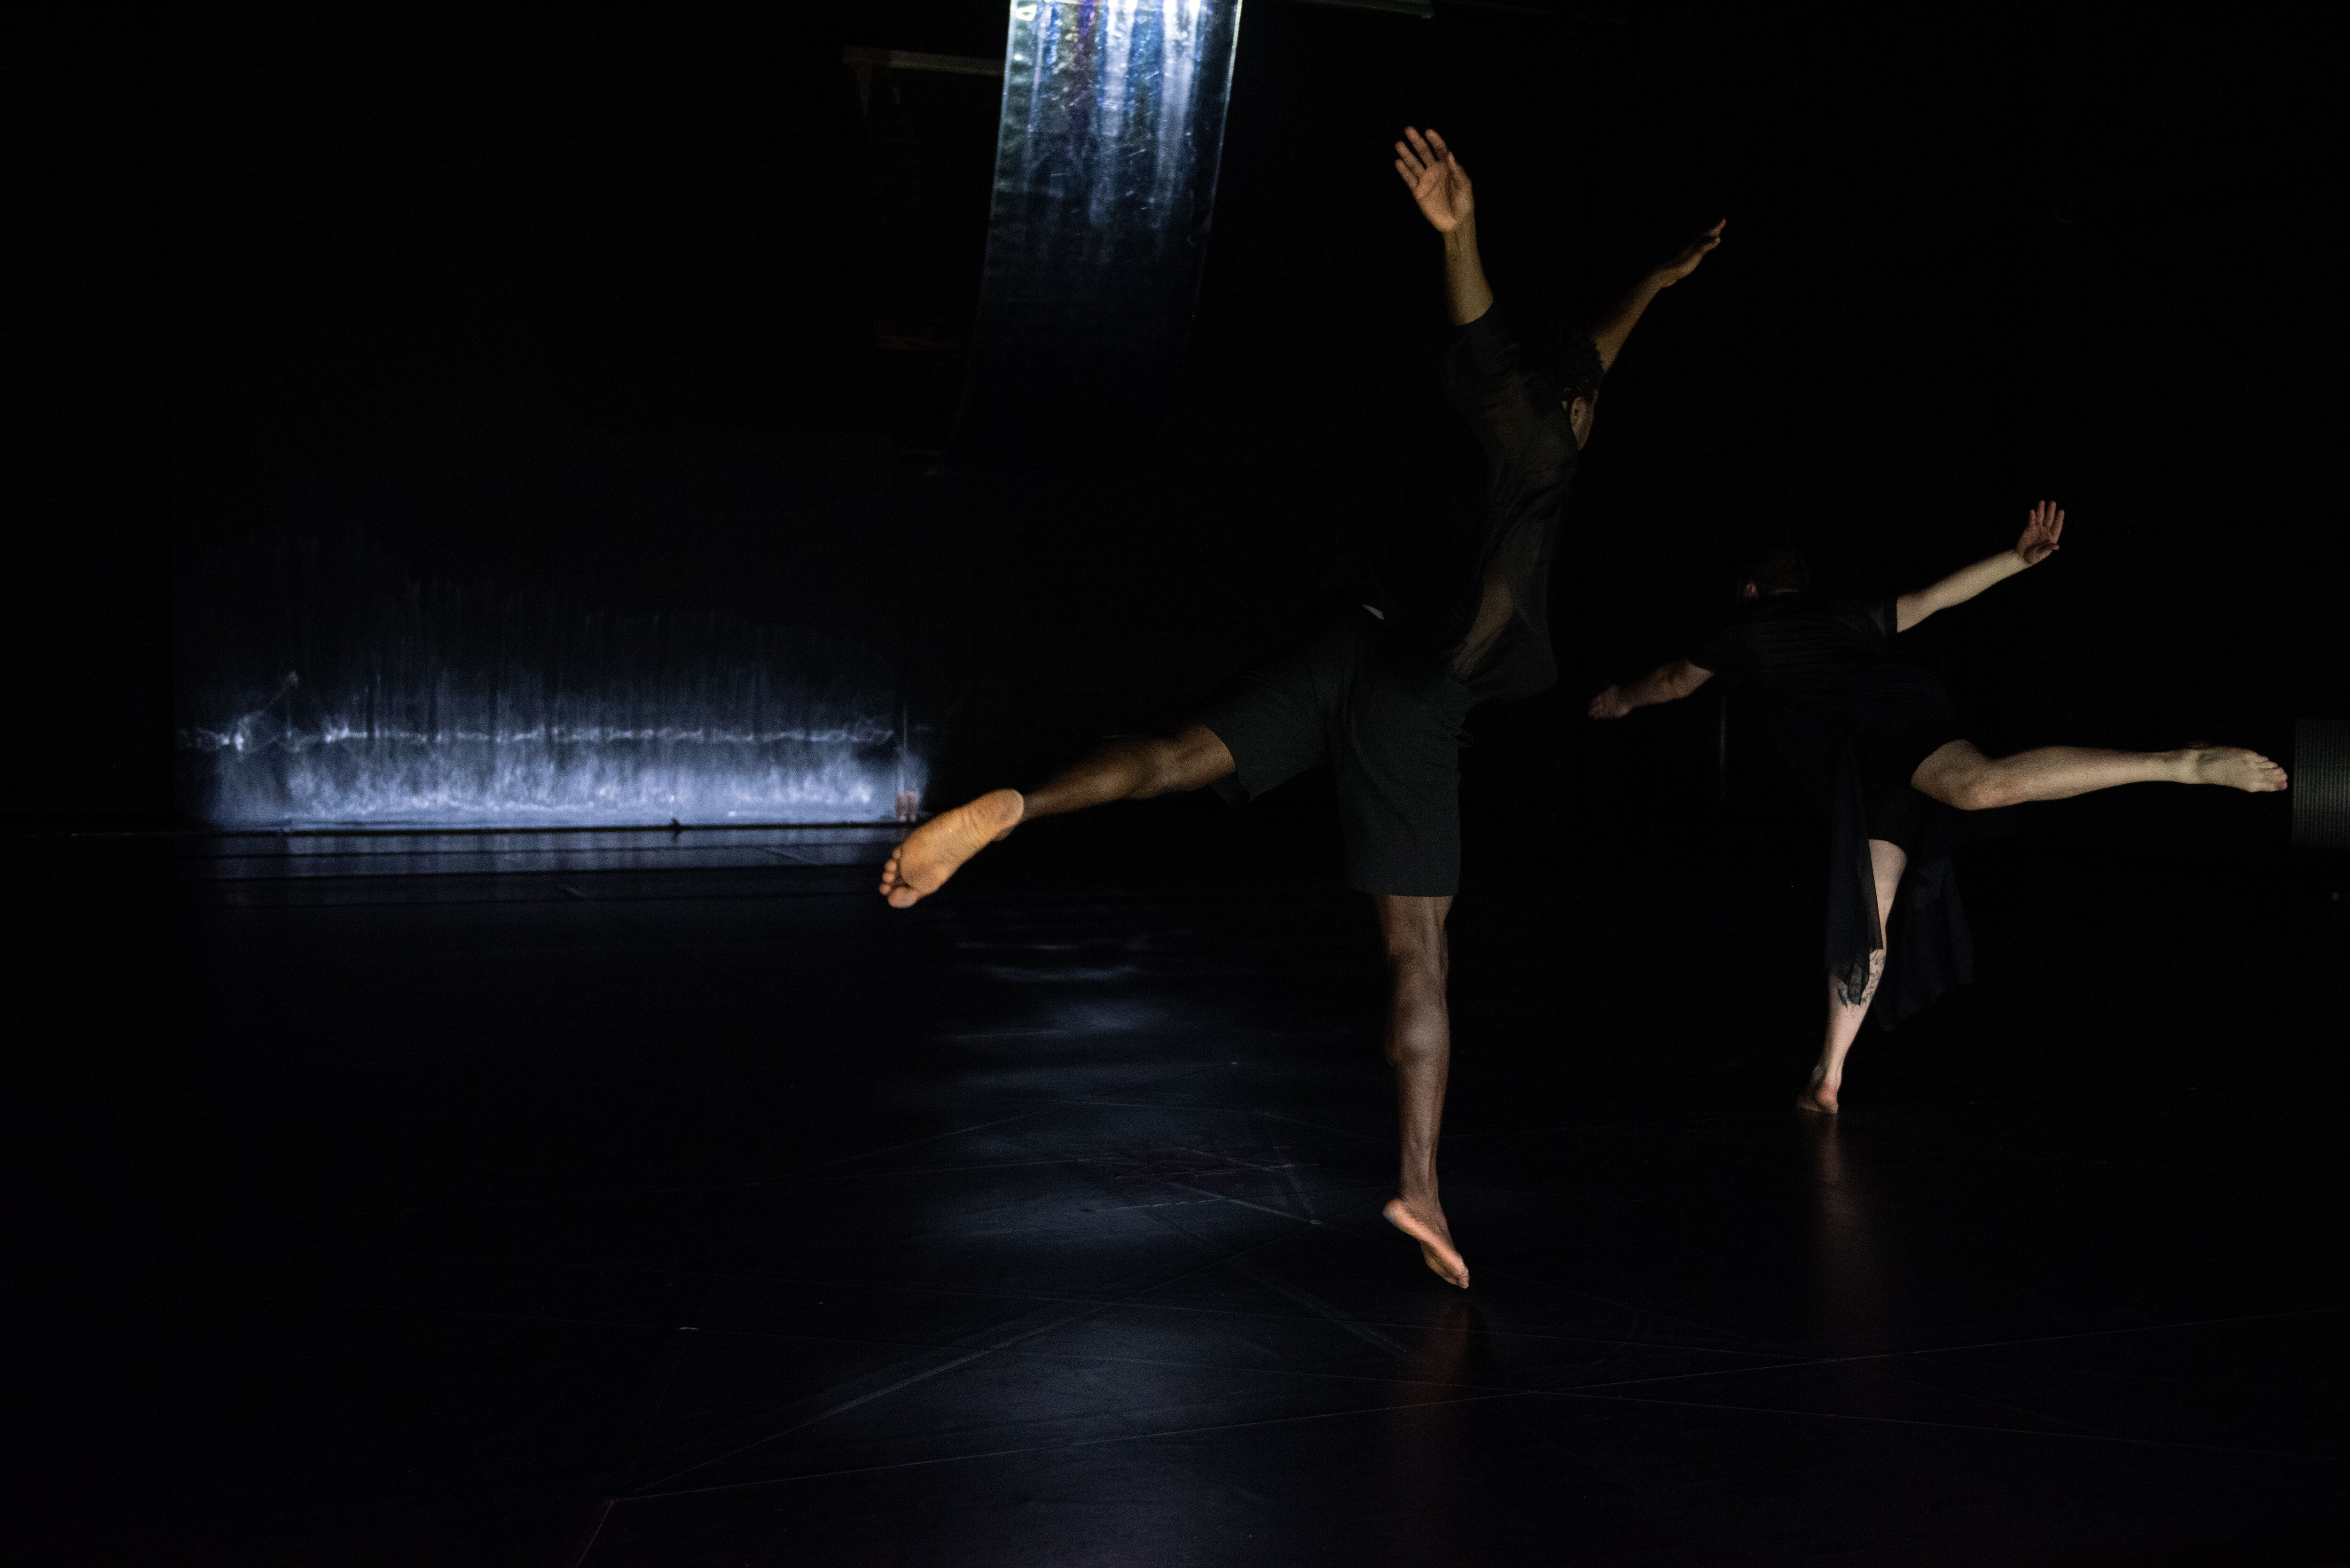 Two dancers jumping on a dark stage